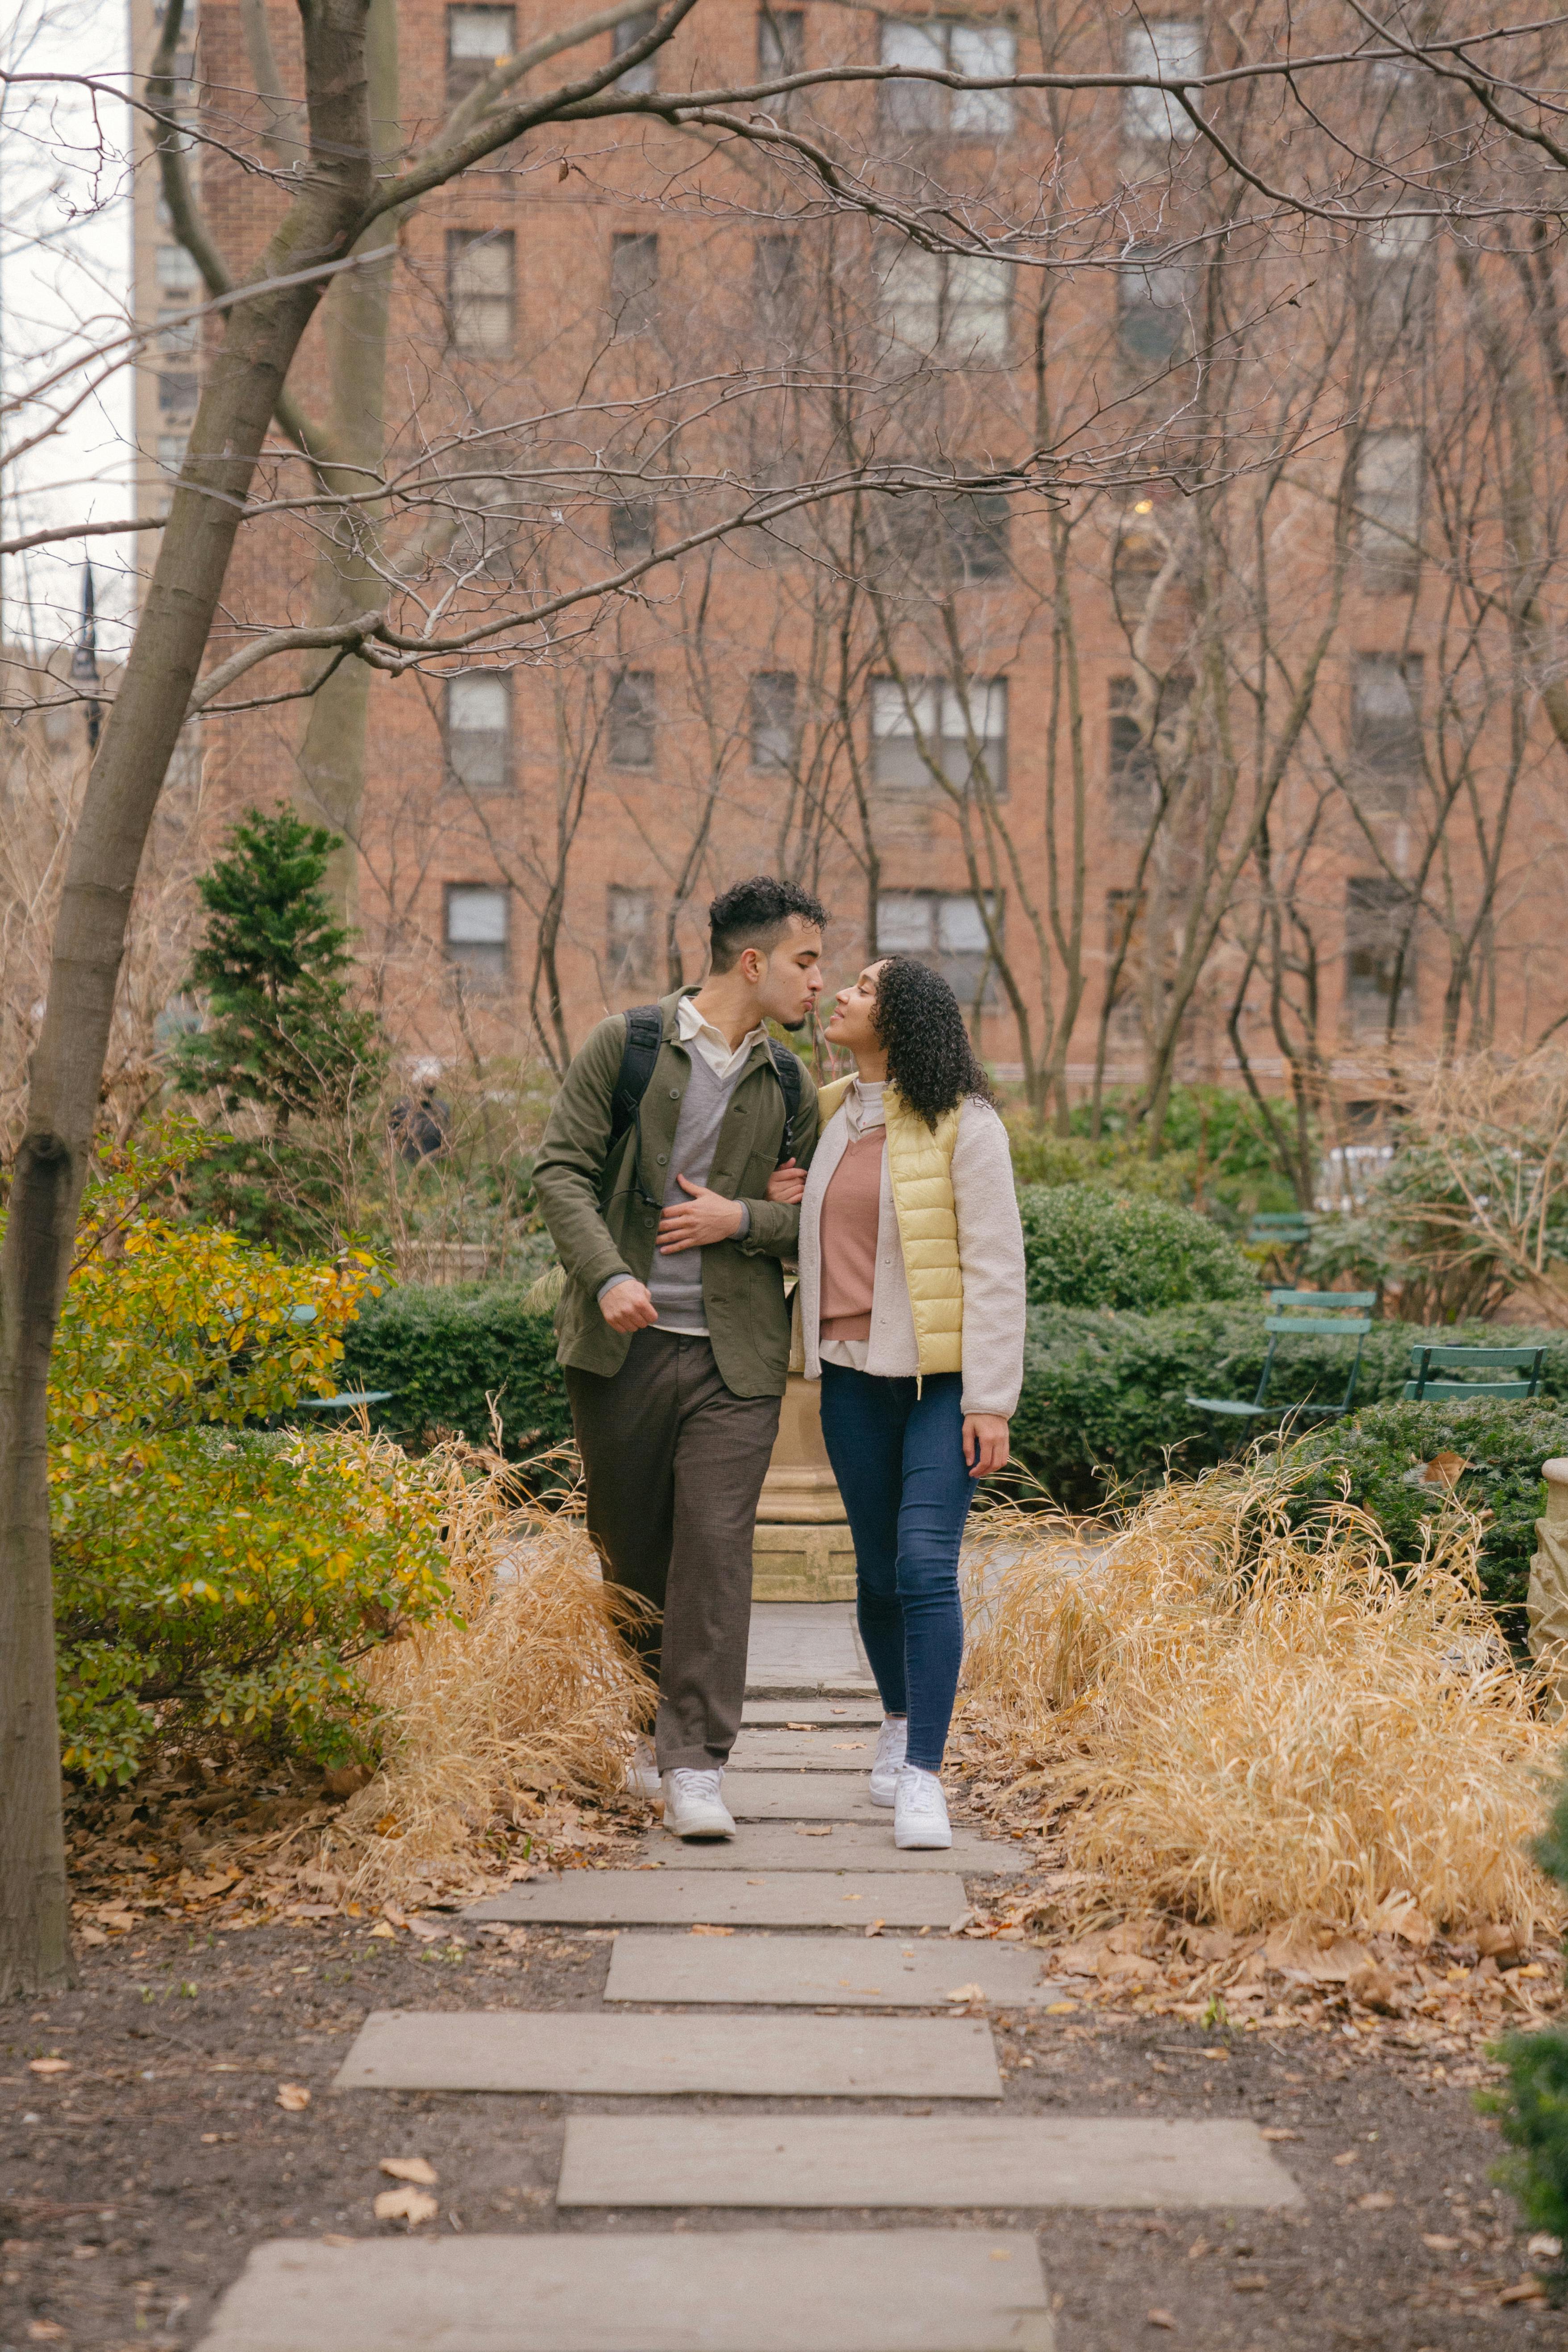 ethnic couple having date while walking in park and kissing